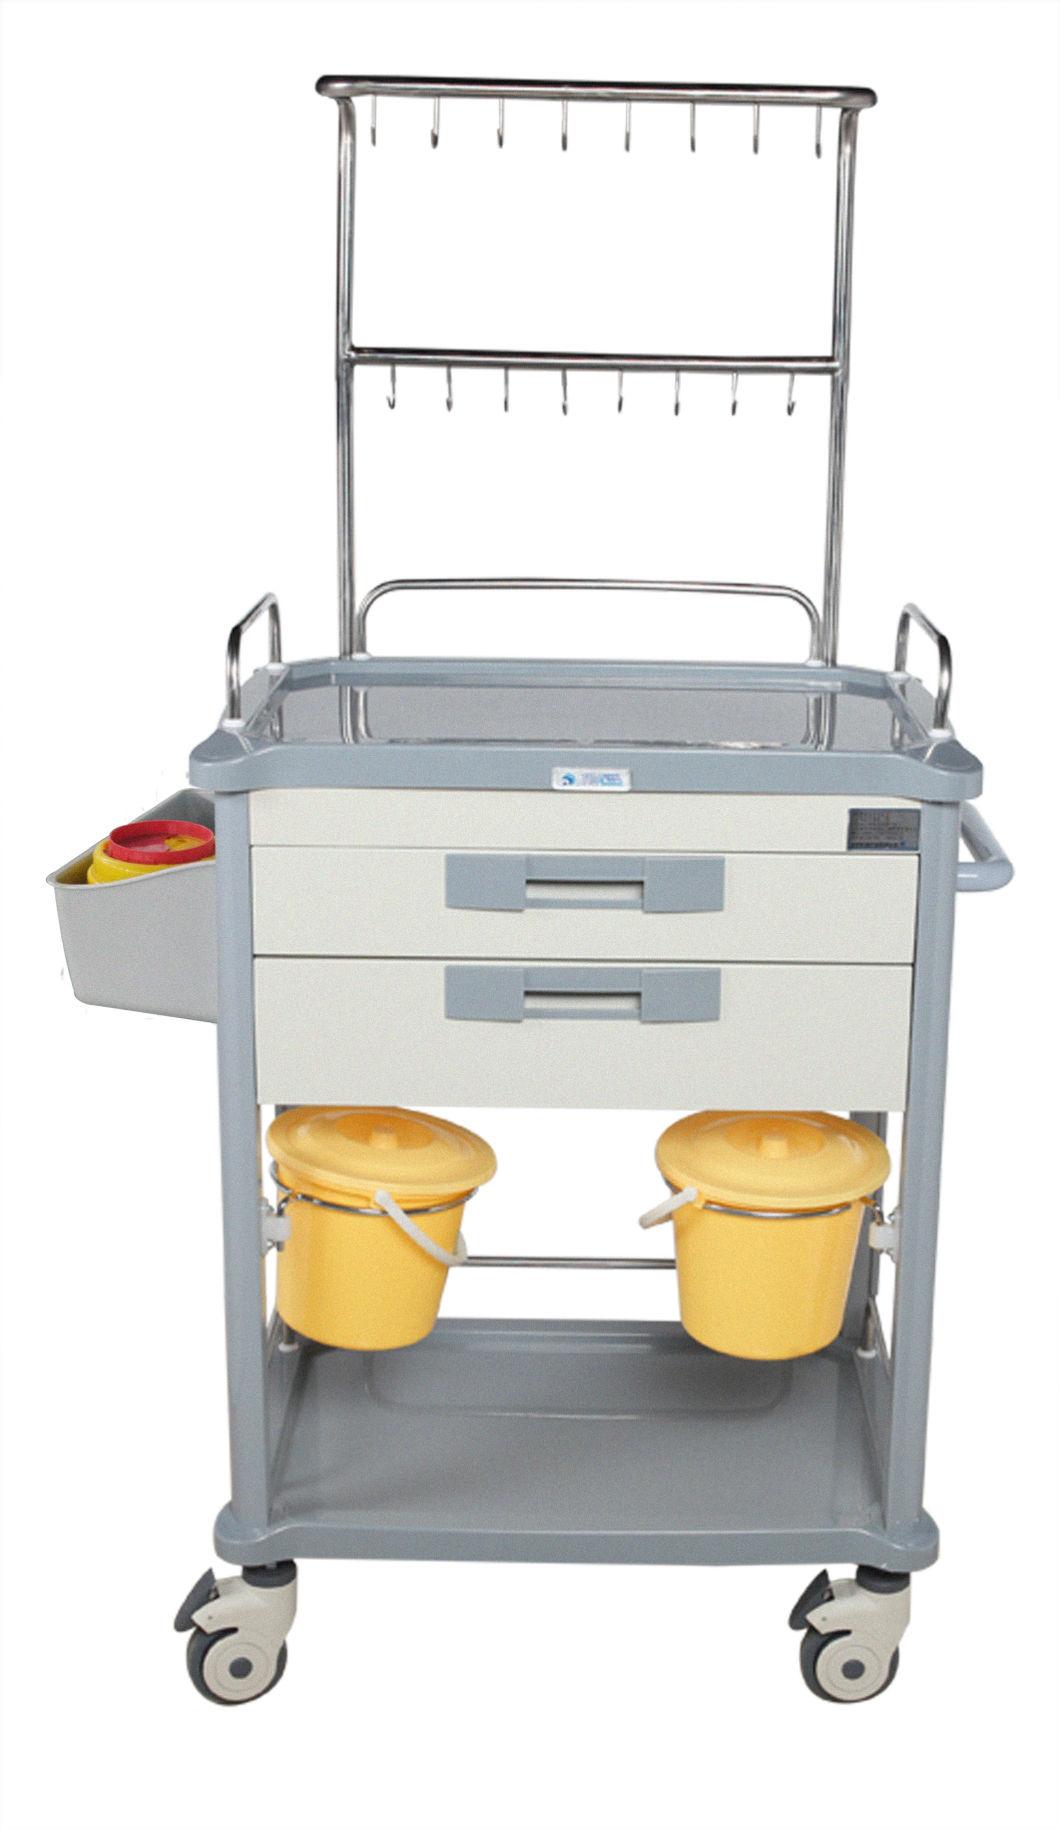 Mt Medical Hot Sales ABS Medical Trolley Cart with Five Drawers for Sale